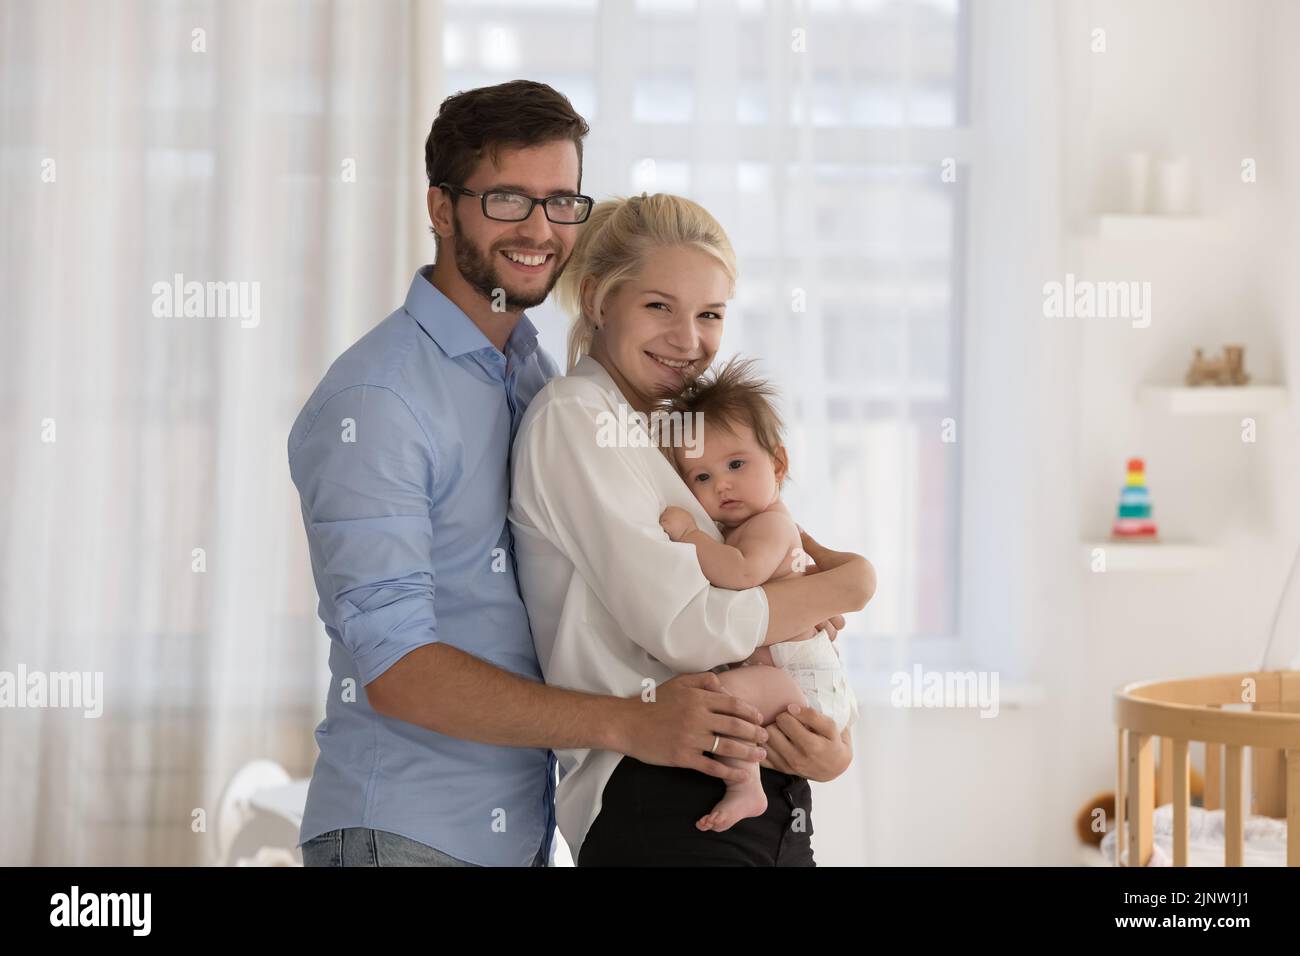 Portrait of young loving parents hugging their cute newborn baby Stock Photo